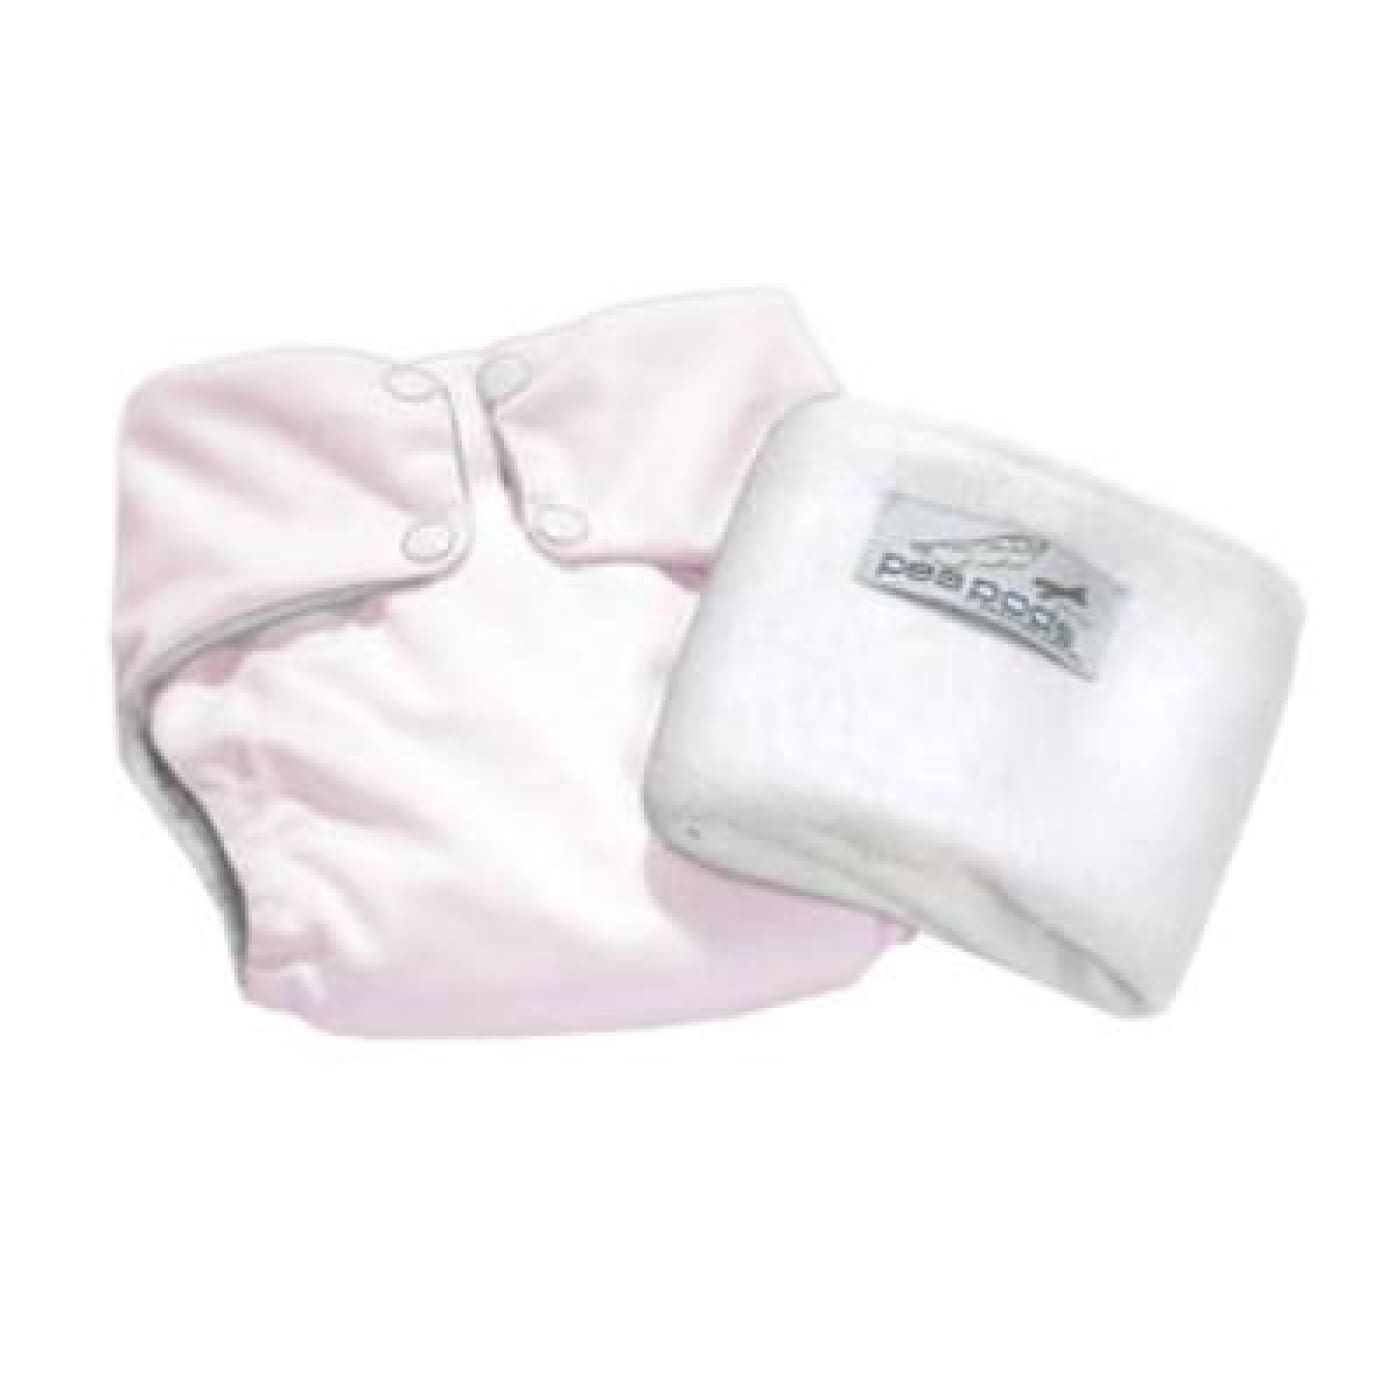 Pea Pods One Size Fits All Nappy - Pastel Pink - BATHTIME & CHANGING - NAPPIES/WIPES/ACC ECO RANGE